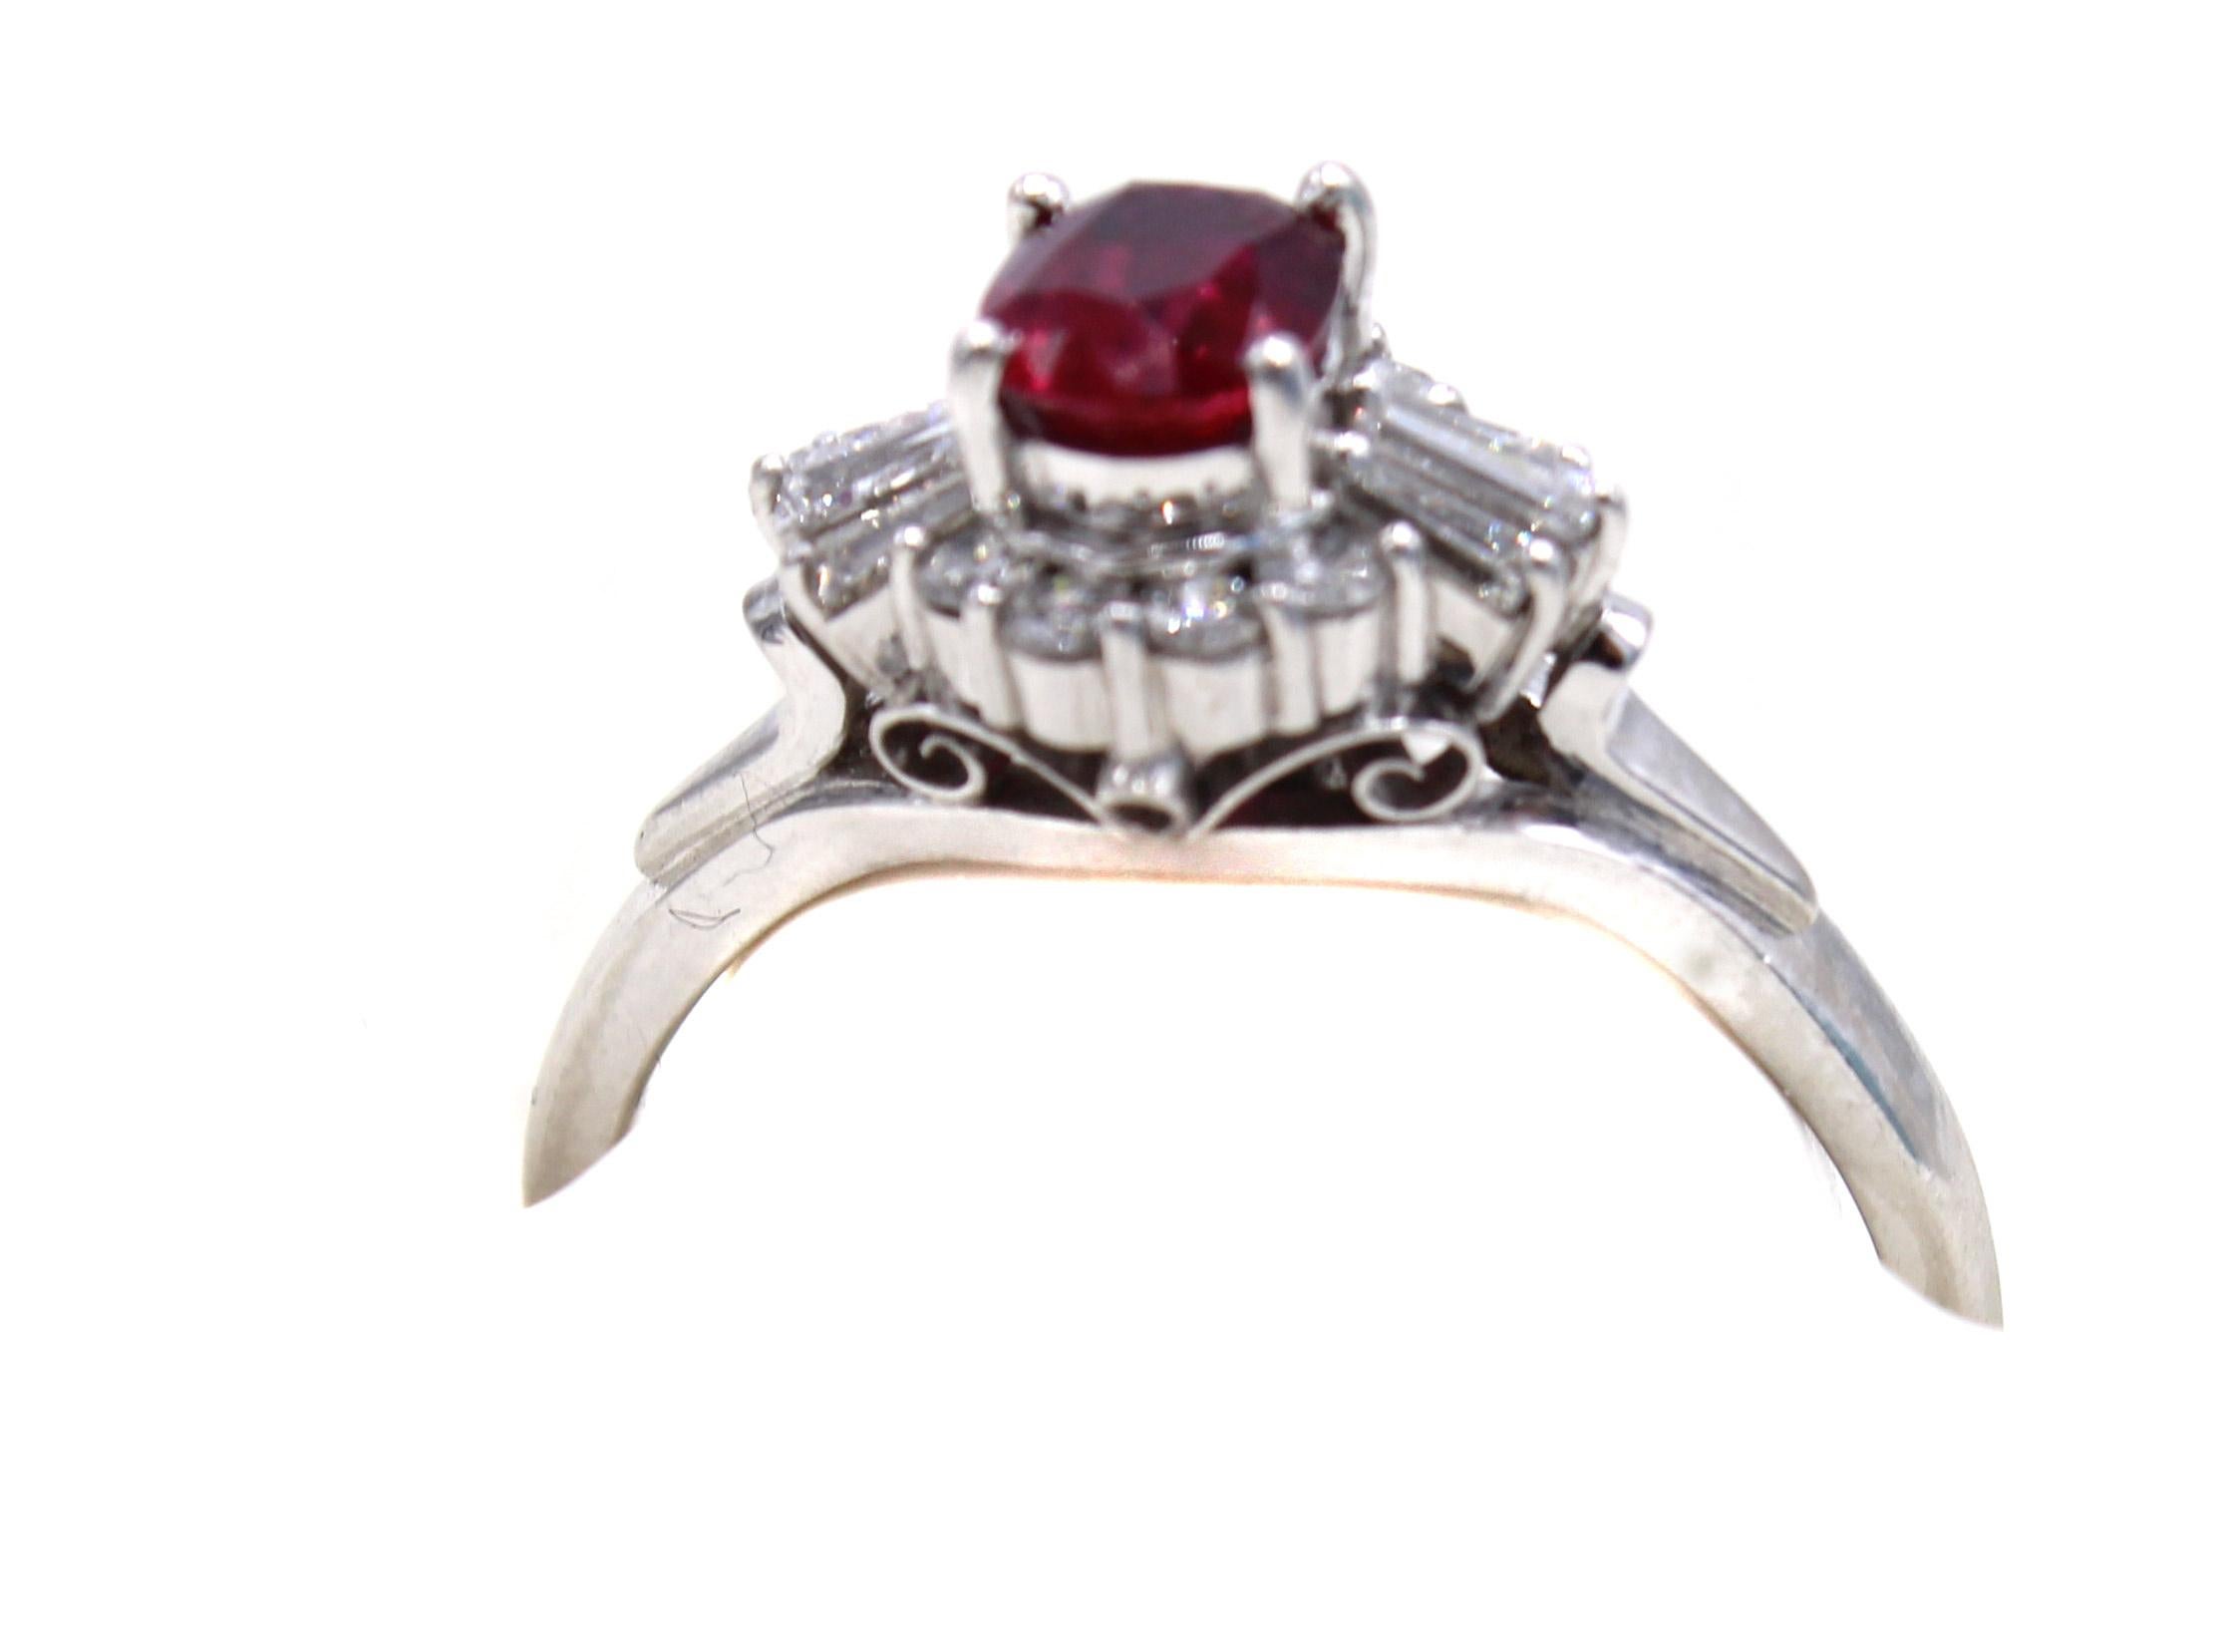 Wonderfully designed and masterfully hand-crafted this platinum engagement ring features a Pigeon Blood red Burma ruby weighing 0.85 carats. Embellishing the center gem are 8 round brilliant cut and 6 tapered baguette cut diamonds with a total